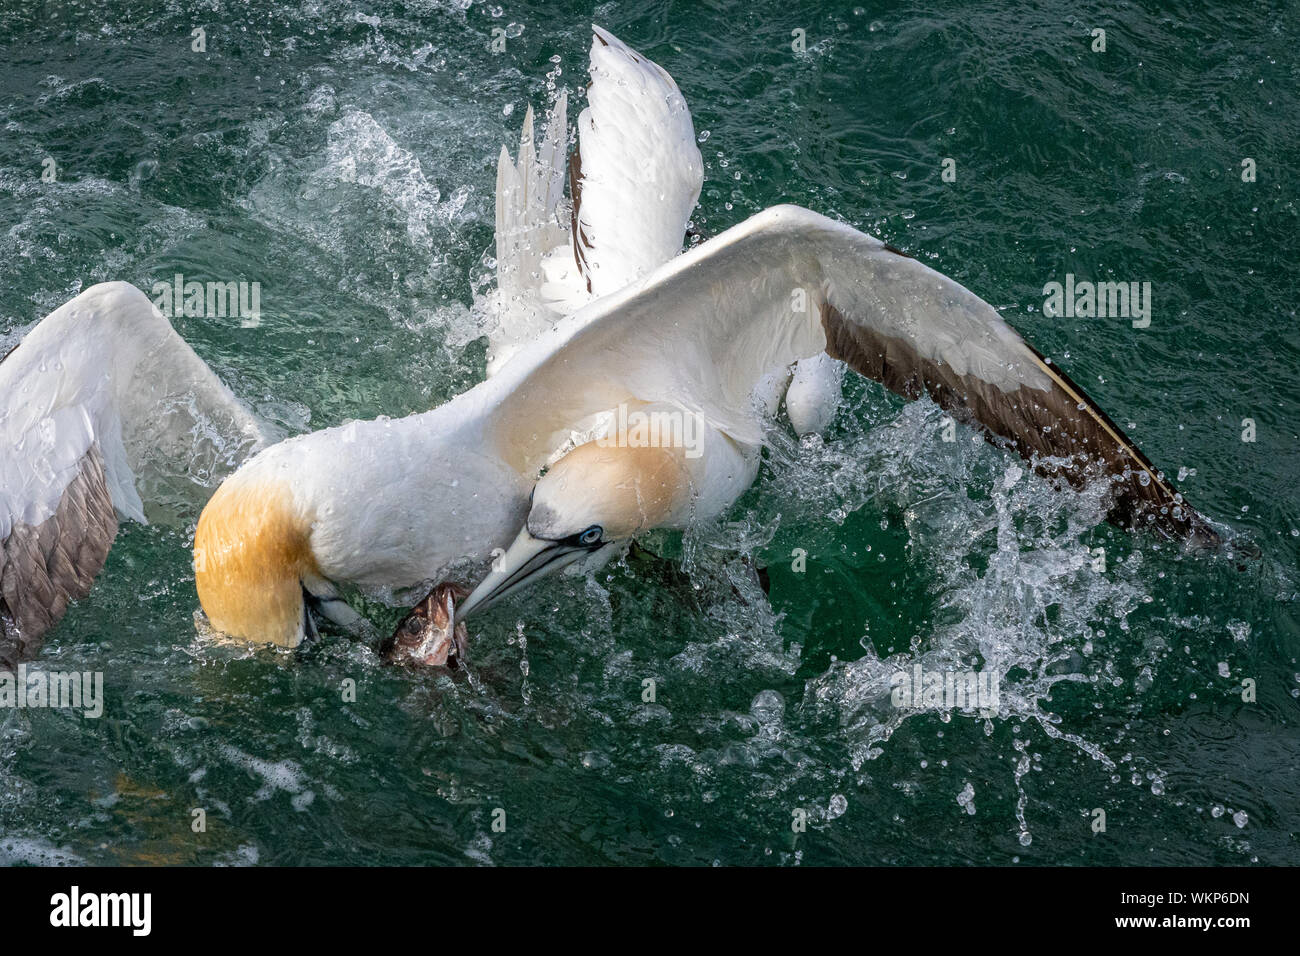 Gannets Fighting Over Fish in Sea Stock Photo